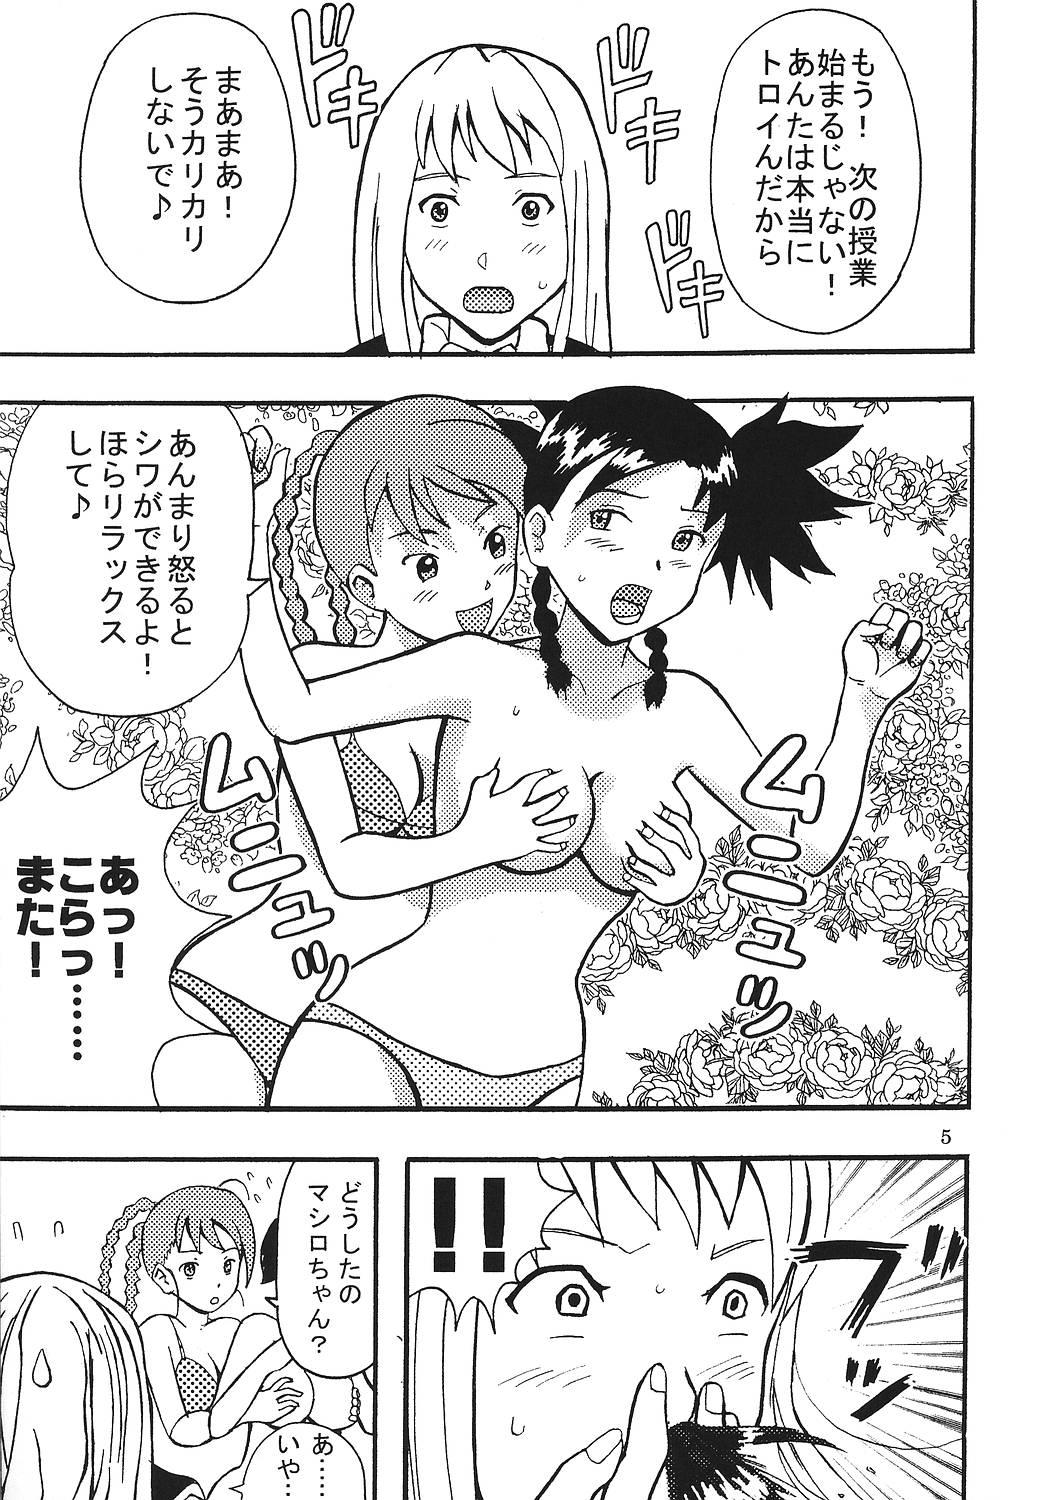 Roundass SUPER COSMIC BREED 3 - Super robot wars Mai-hime Mai-otome Picked Up - Page 6